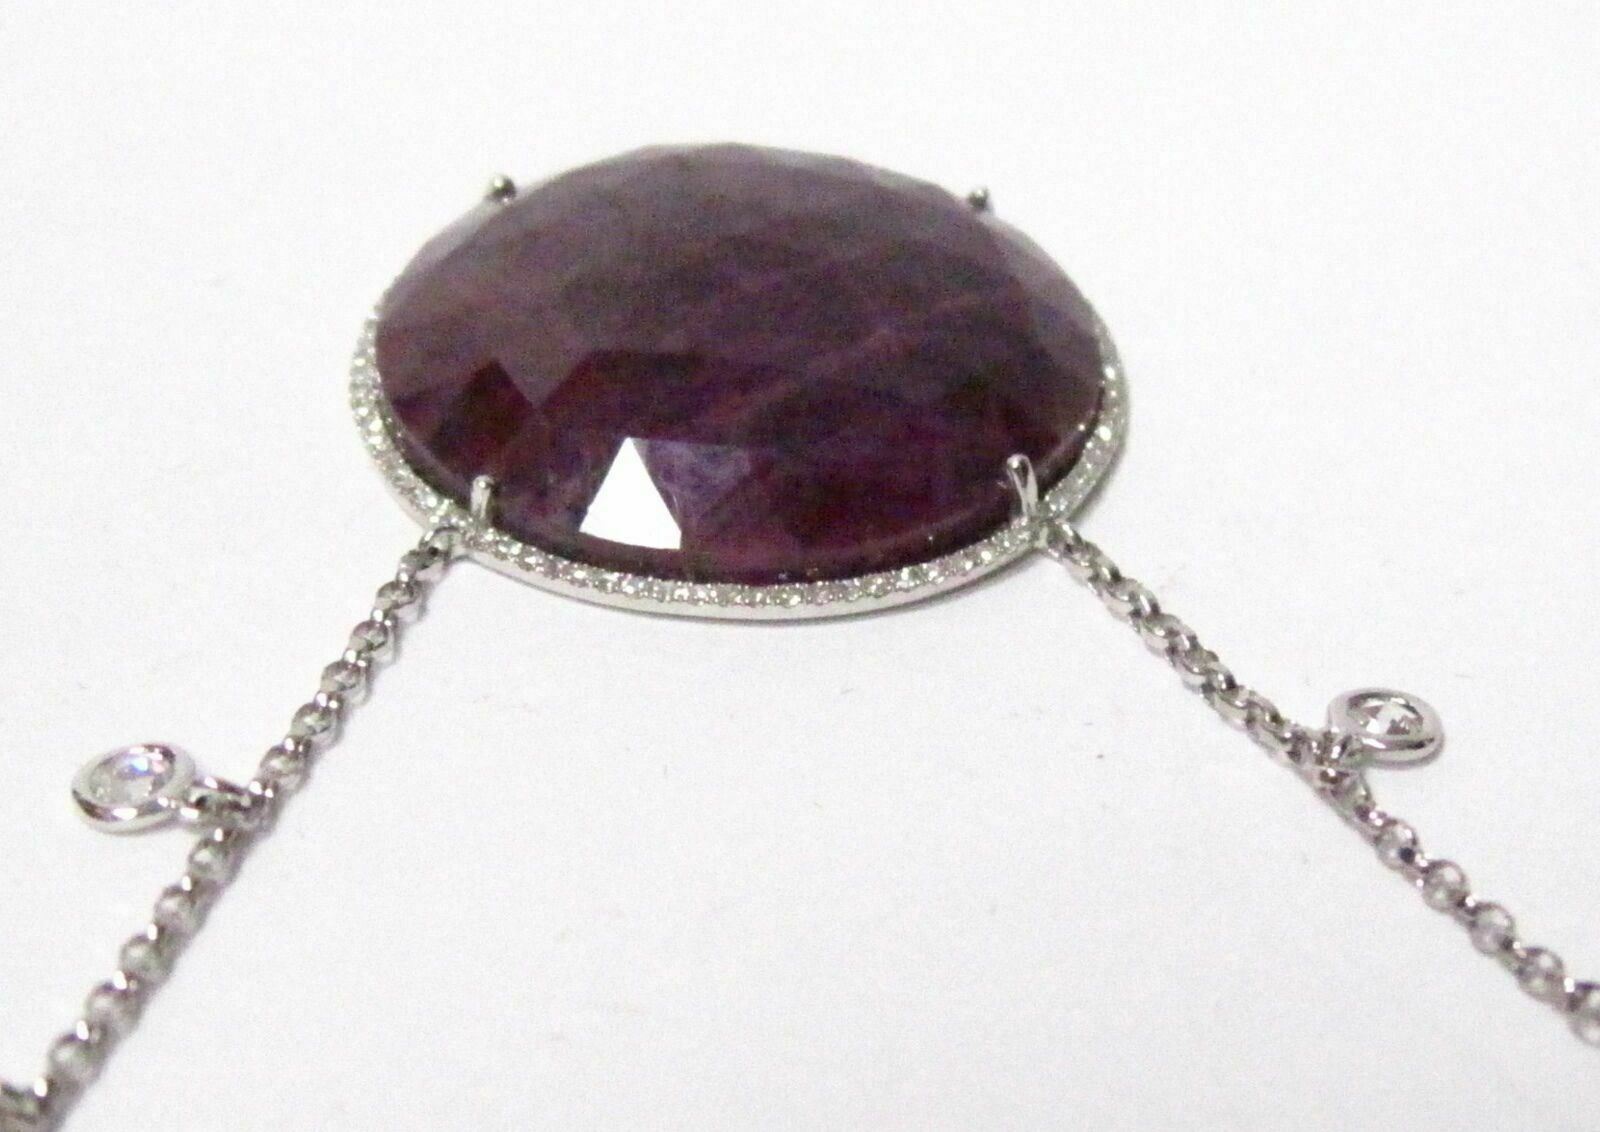 39.27 TCW Rose Cut Red Ruby & White Diamonds Pendant Necklace 14k White Gold 17"